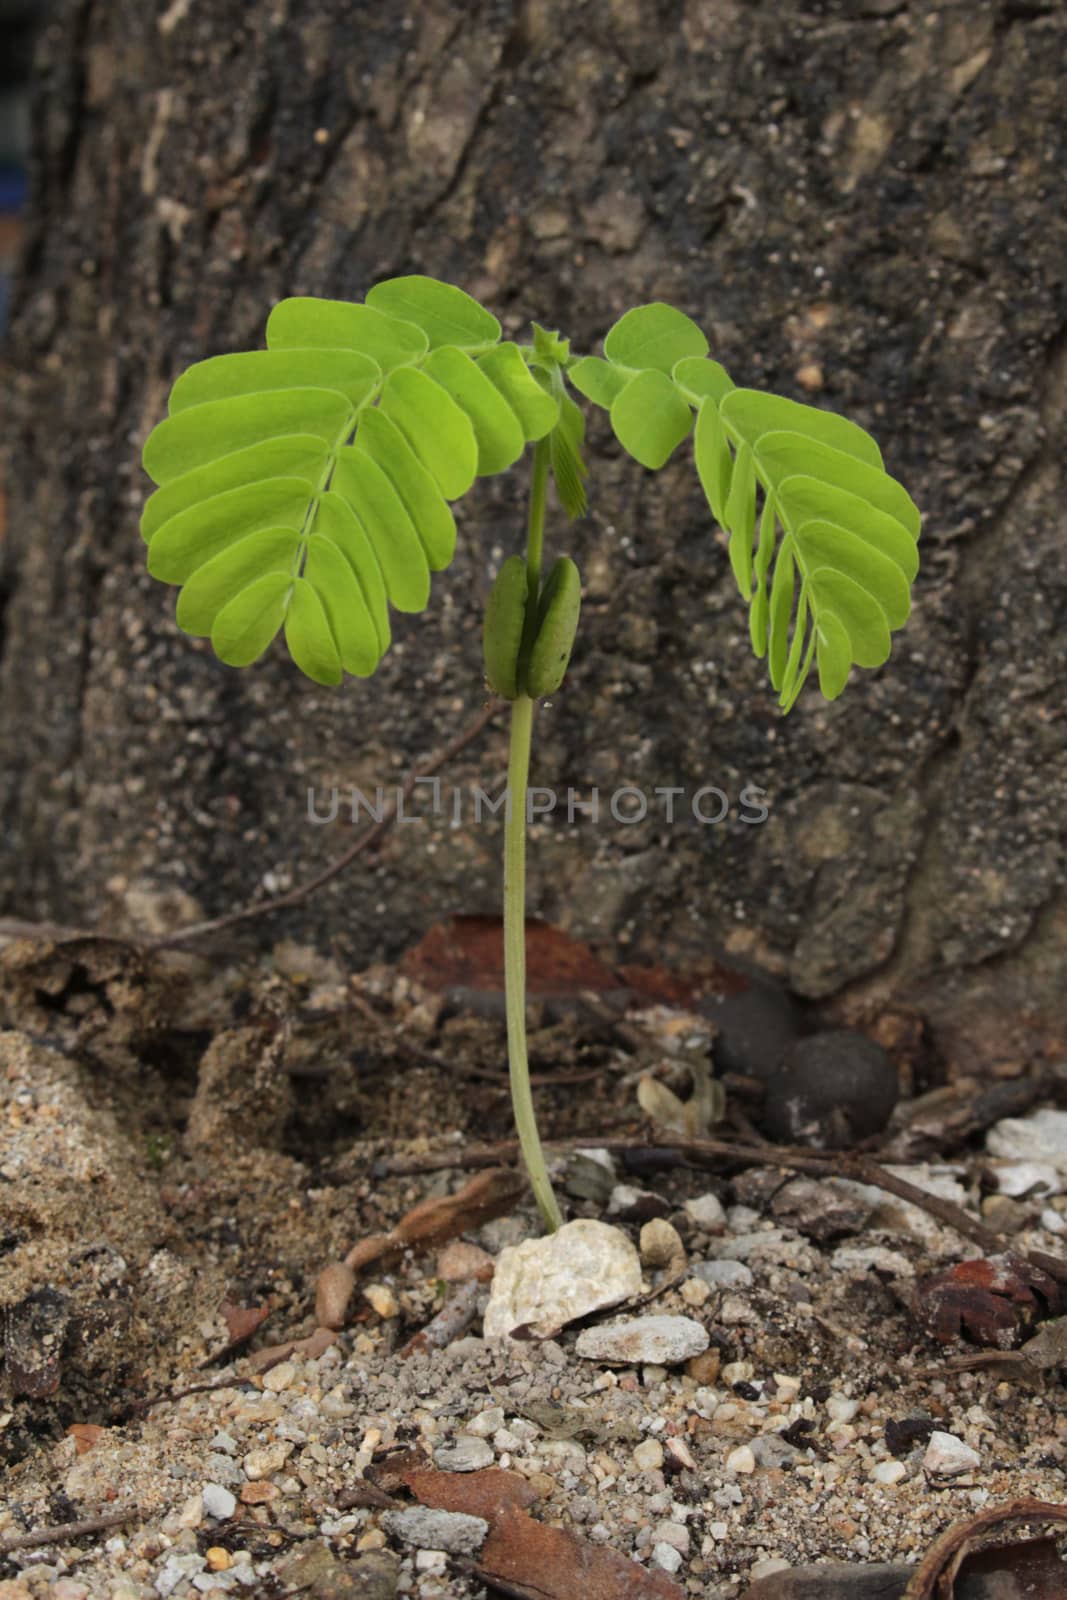 The sprout tamarind is growing from its seed on the ground in the rainy season.